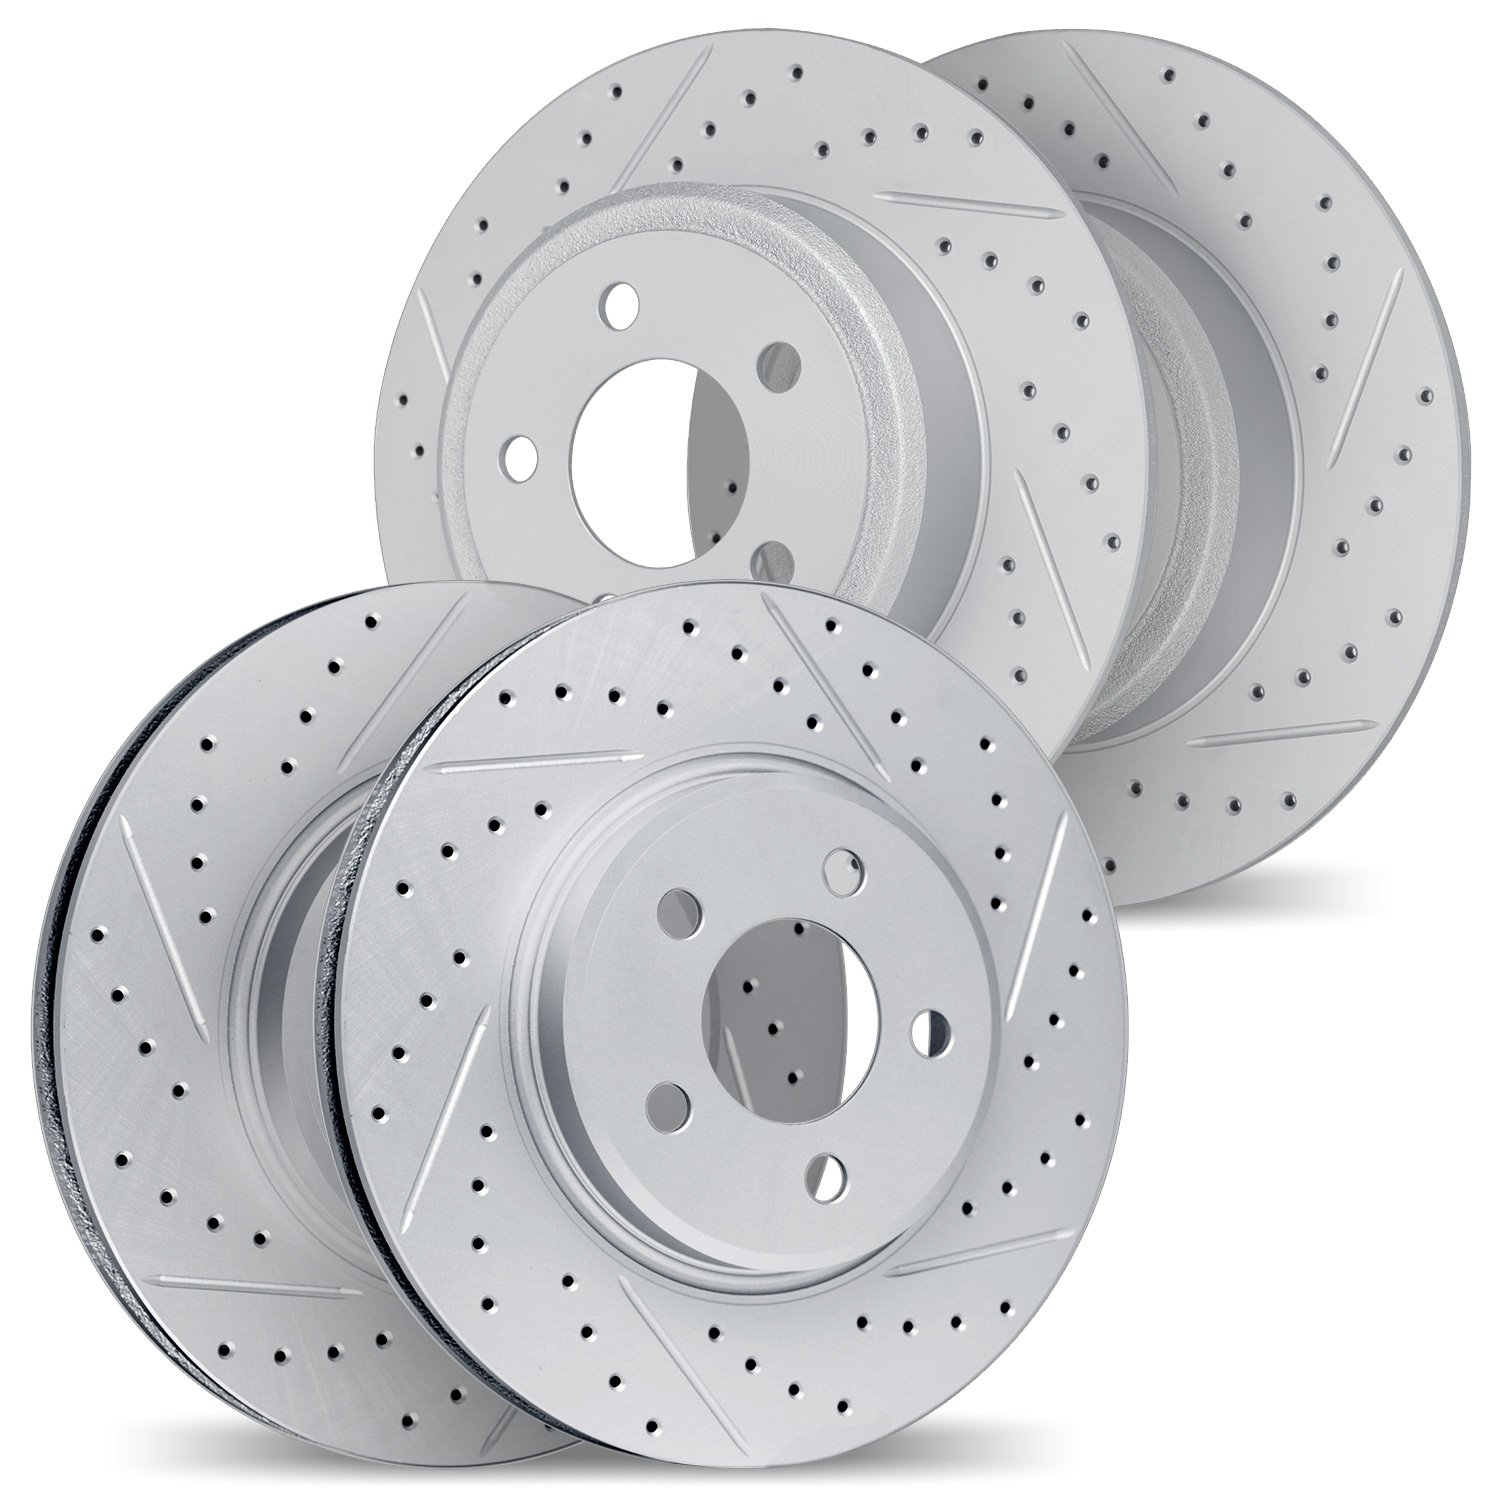 2004-76007 Geoperformance Drilled/Slotted Brake Rotors, 2007-2012 Lexus/Toyota/Scion, Position: Front and Rear